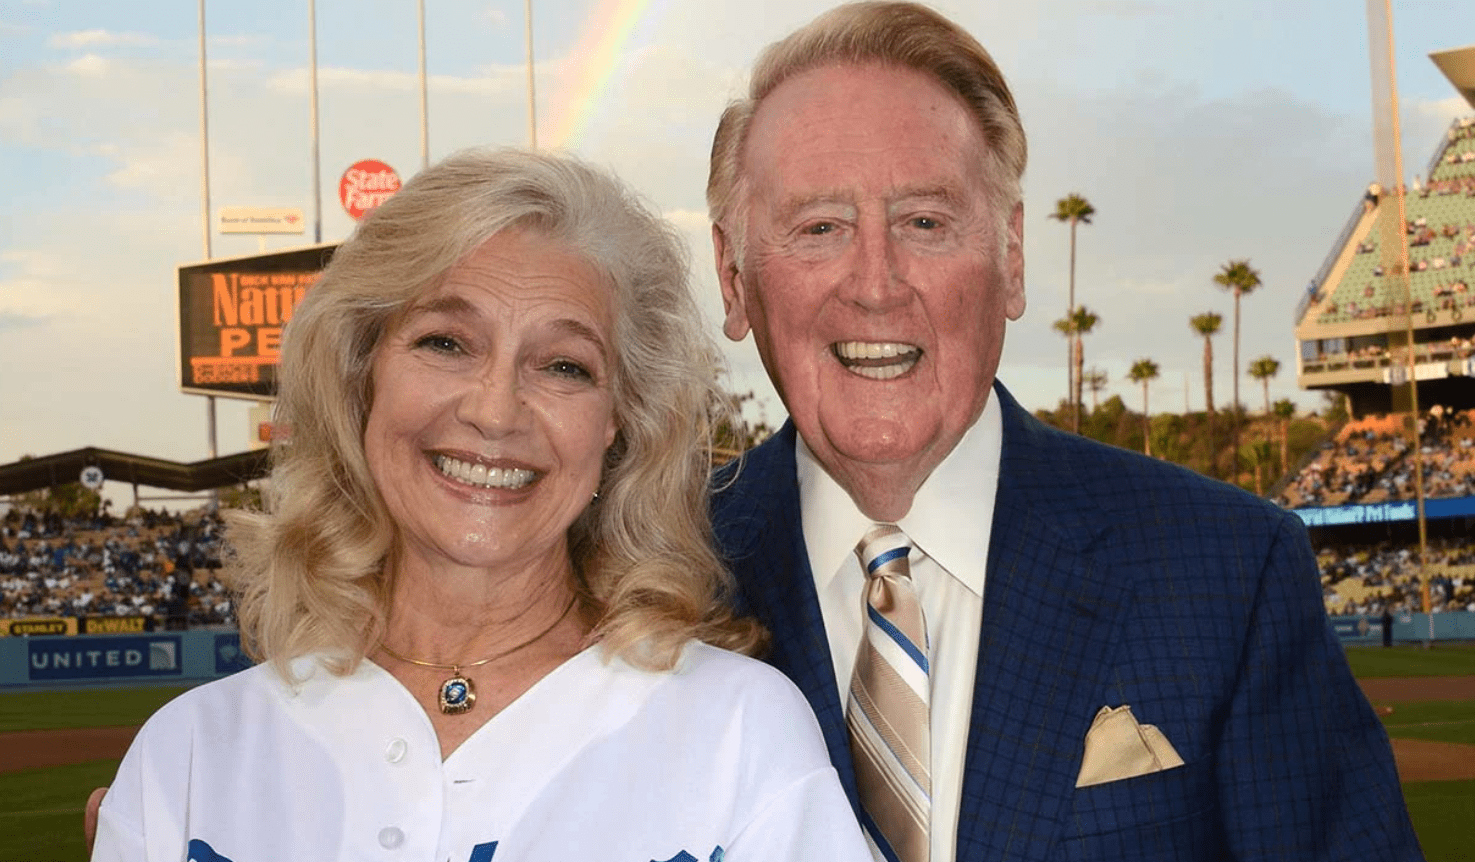 Sandra Hunt & Vin Scully during a game (Source: The Hollywood Reporter)